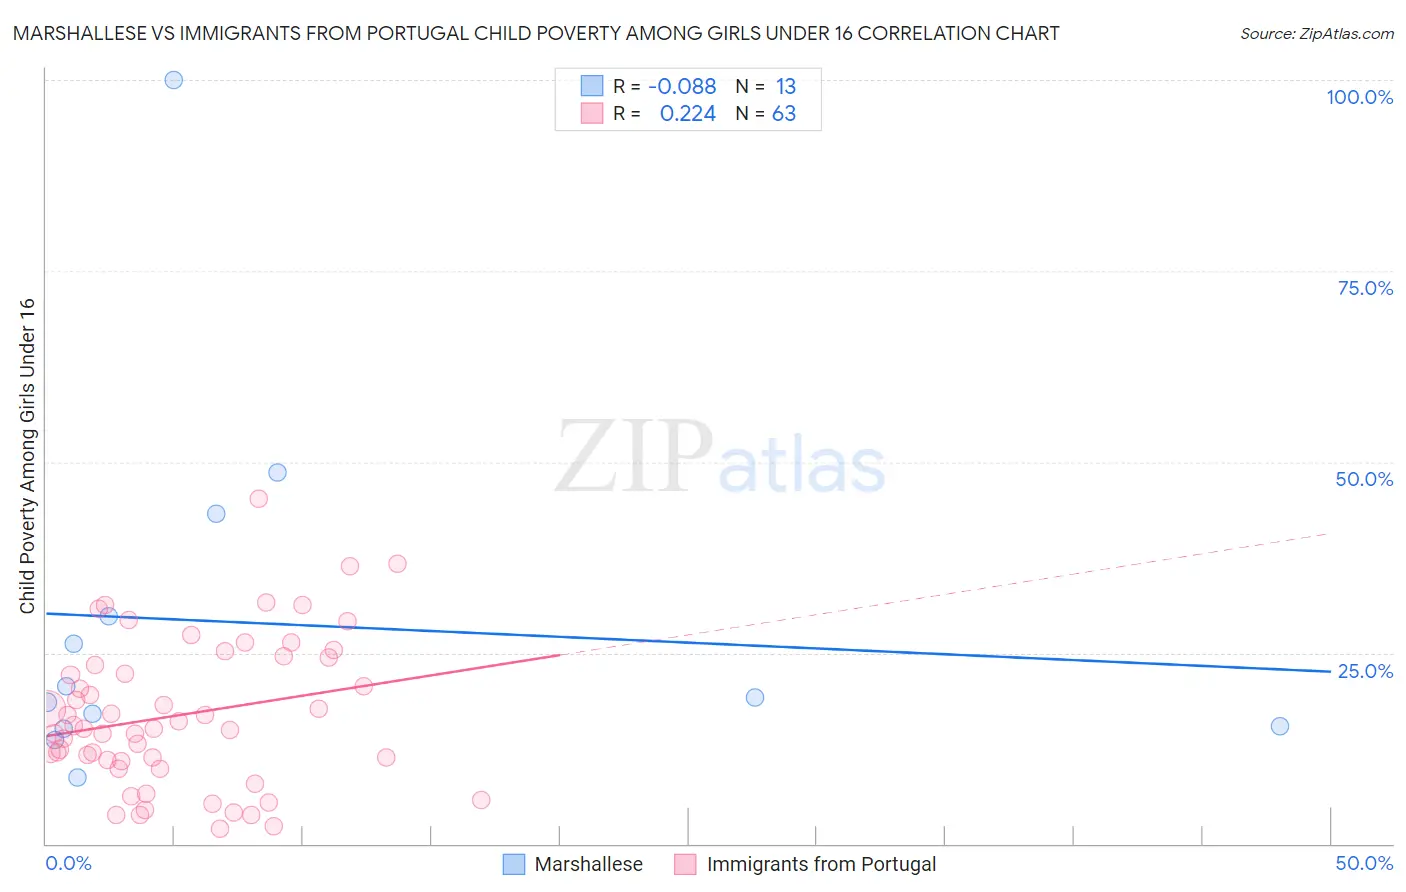 Marshallese vs Immigrants from Portugal Child Poverty Among Girls Under 16